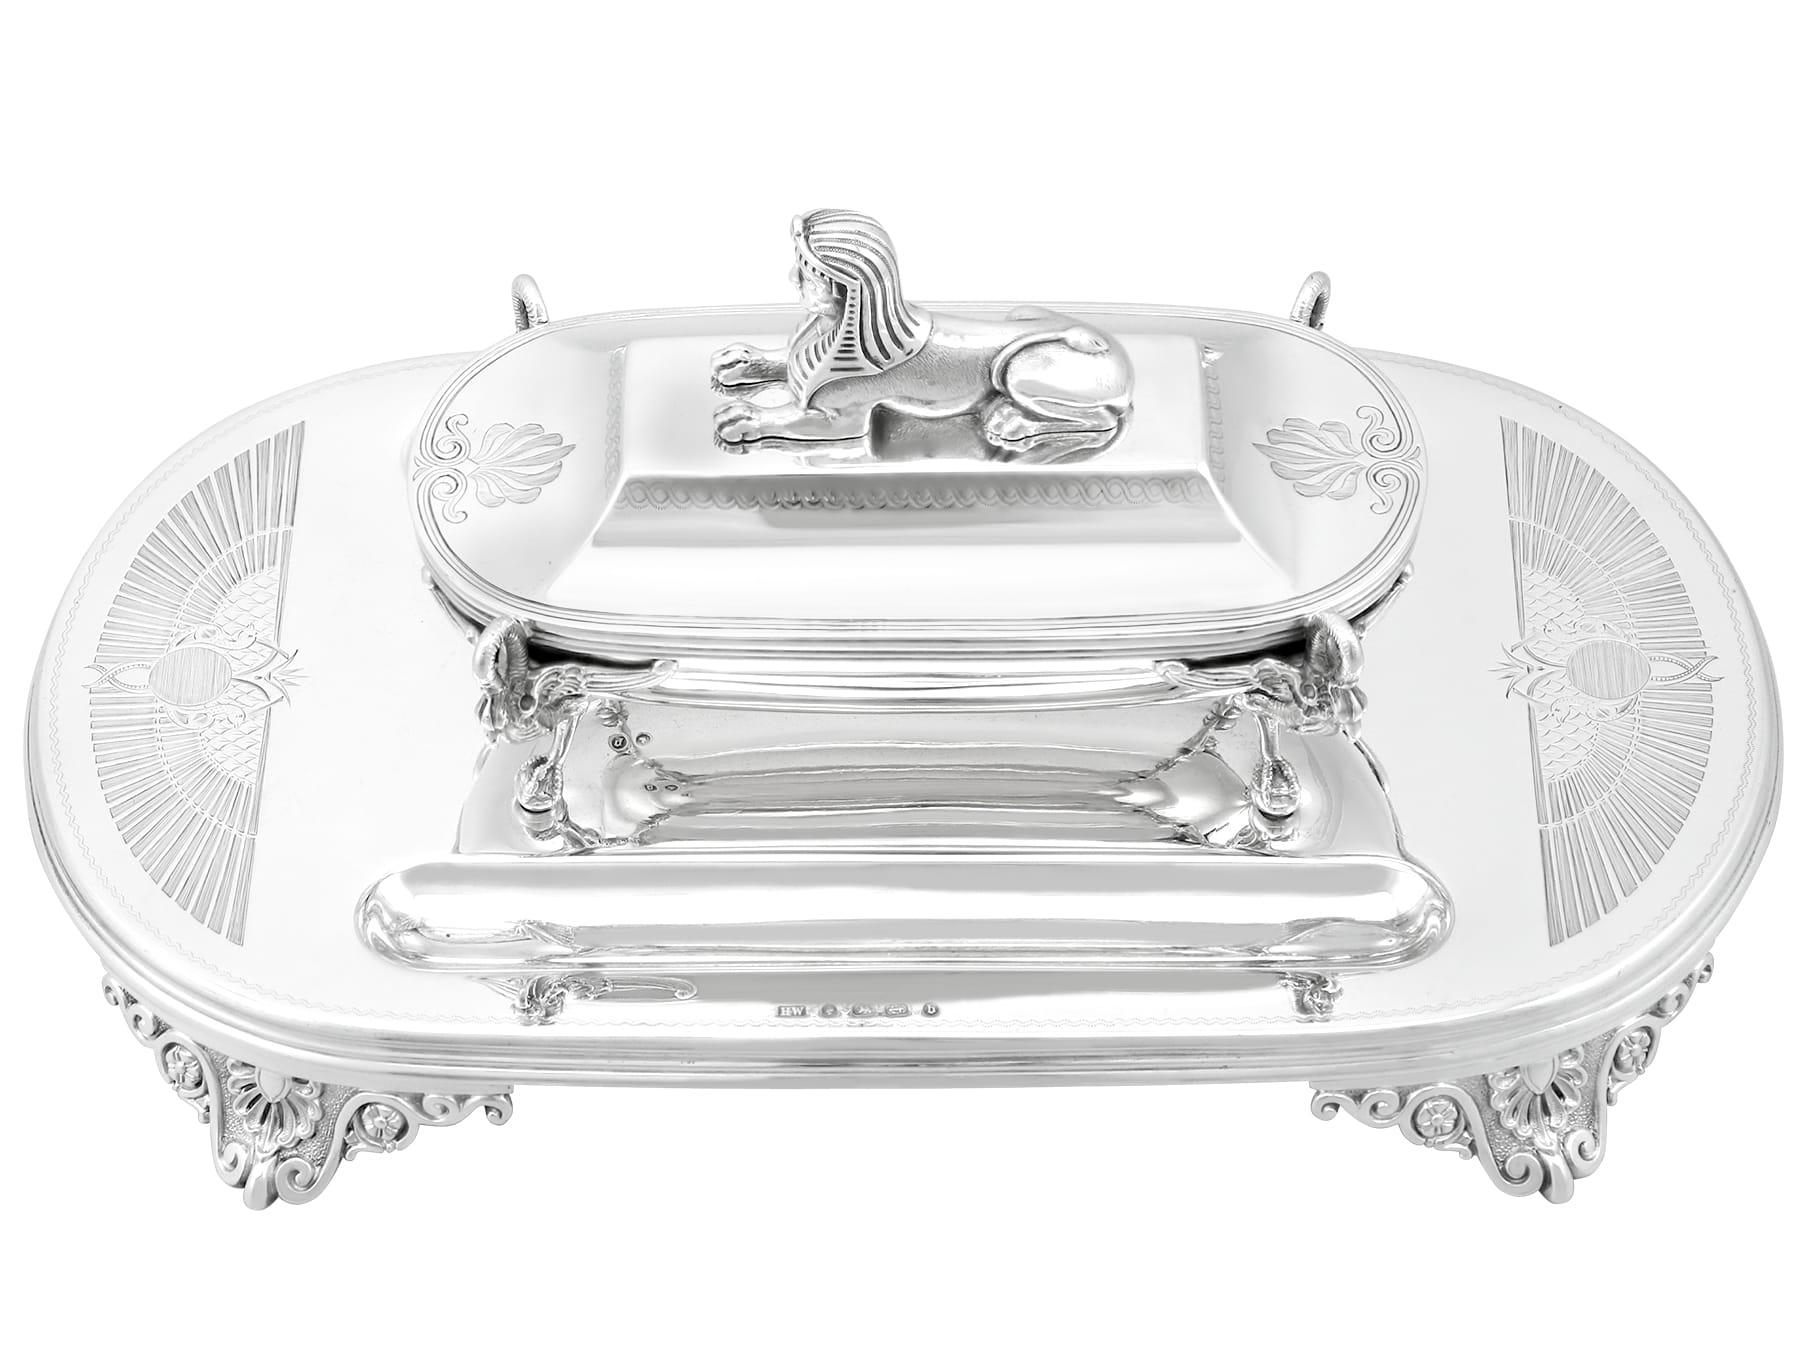 An exceptional, fine and impressive, unusual and rare antique Victorian English sterling silver desk standish; an addition to our ornamental silverware collection

This exceptional, unusual and rare antique Victorian sterling silver desk standish